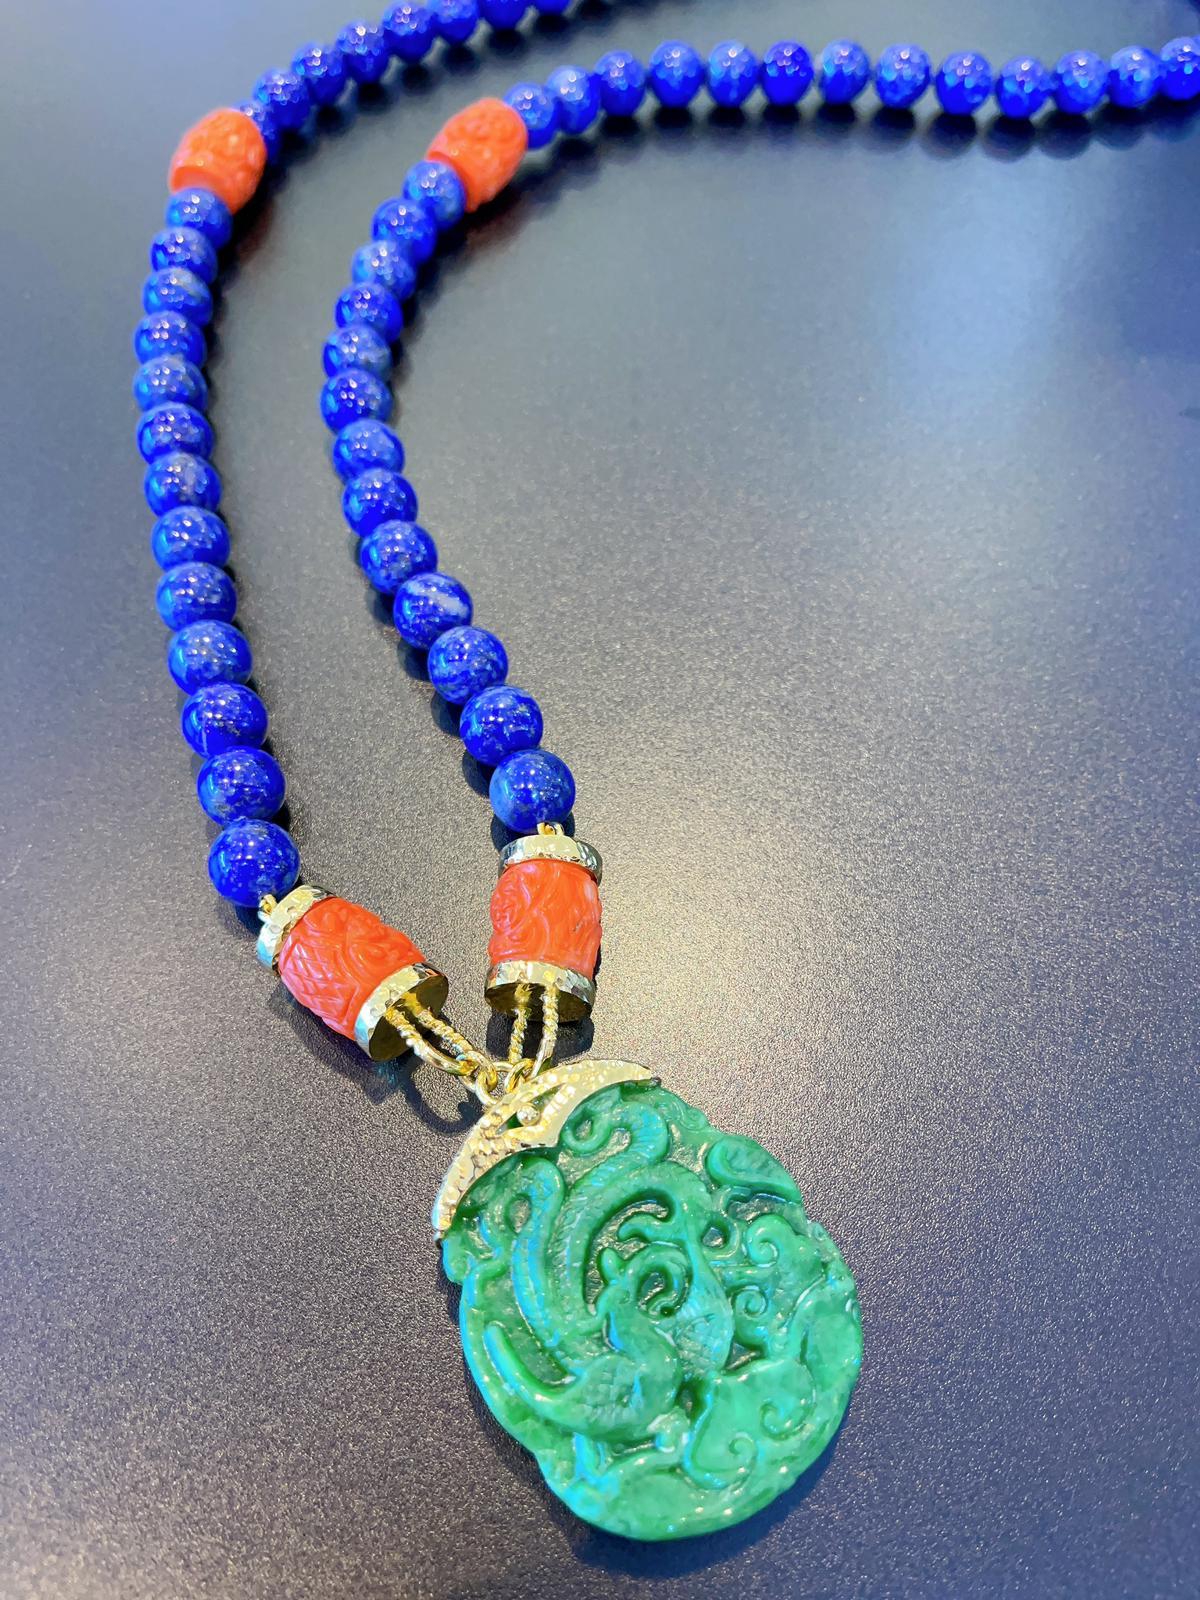 Bochic “Orient” Necklace,  Green Jade, Coral & Lapis Set In 22K Gold & Silver 
Bochic “Capri” Natural Gem Necklace
Natural Blue Lapis round beads 
Salmon Coral Beads 
Green Crafting Jade 
Set in 22K Gold and Silver 
This Necklace is perfect cross